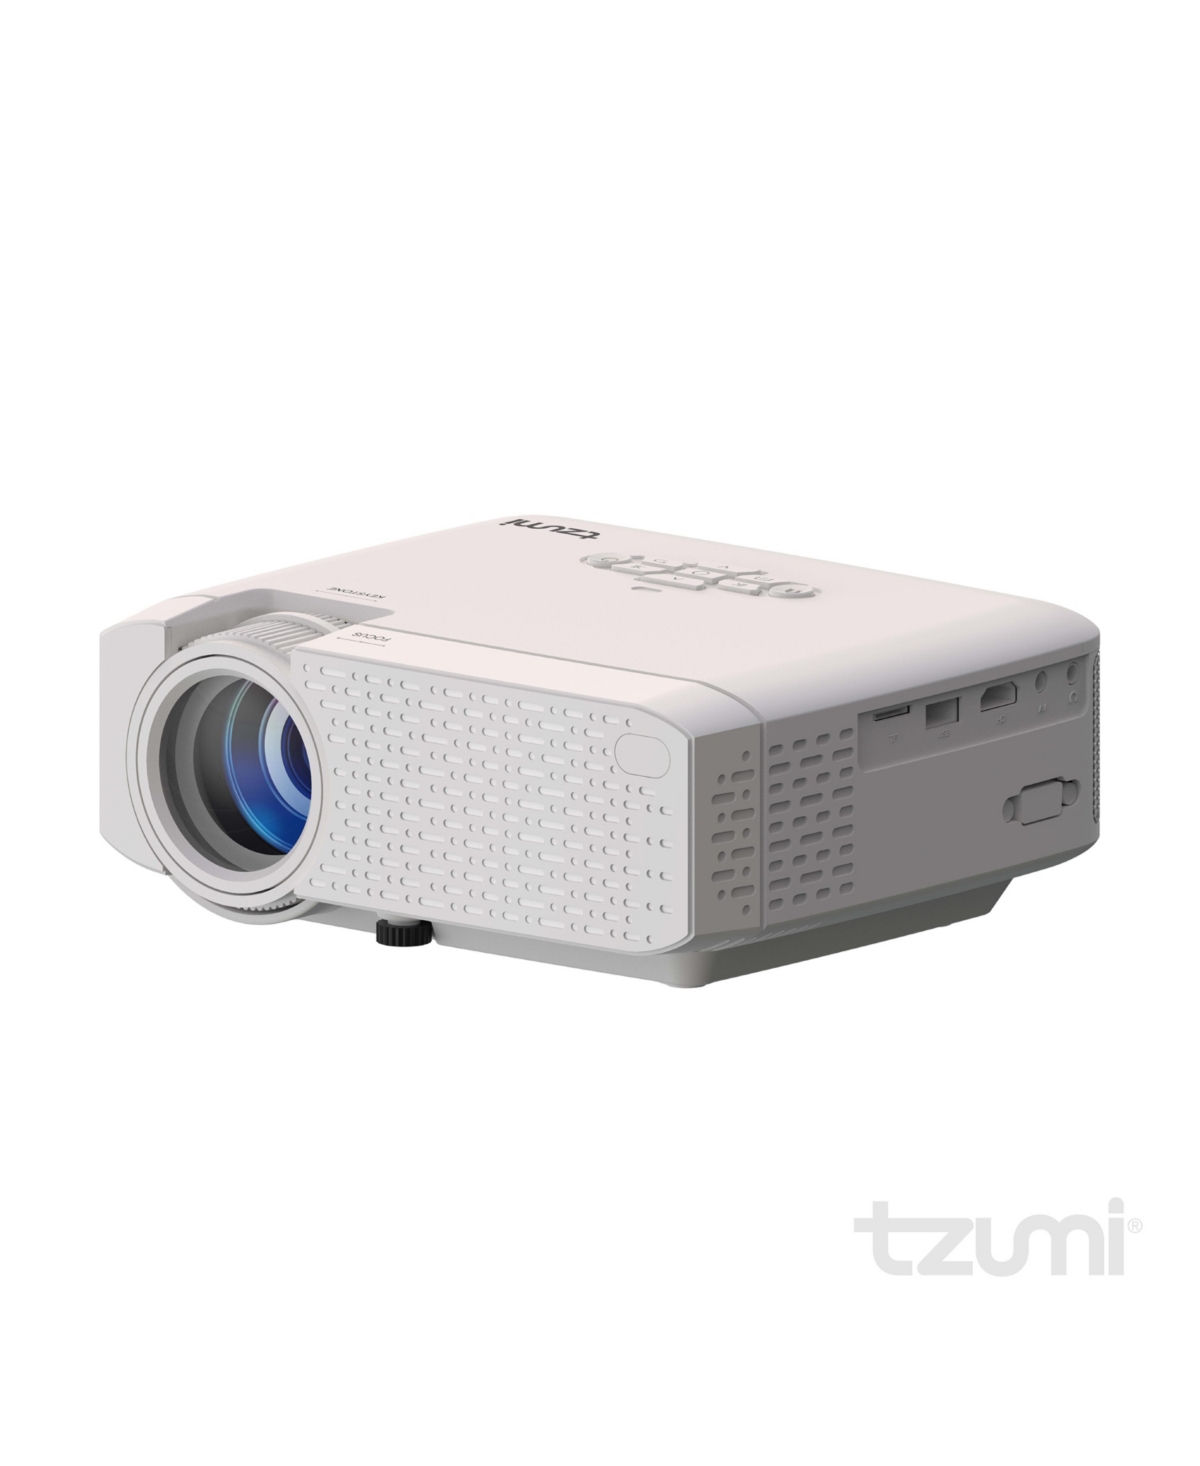 Tzumi Gotheater Portable Home Cinema Light Emitting Diode Mini Projector With Wi-fi In White